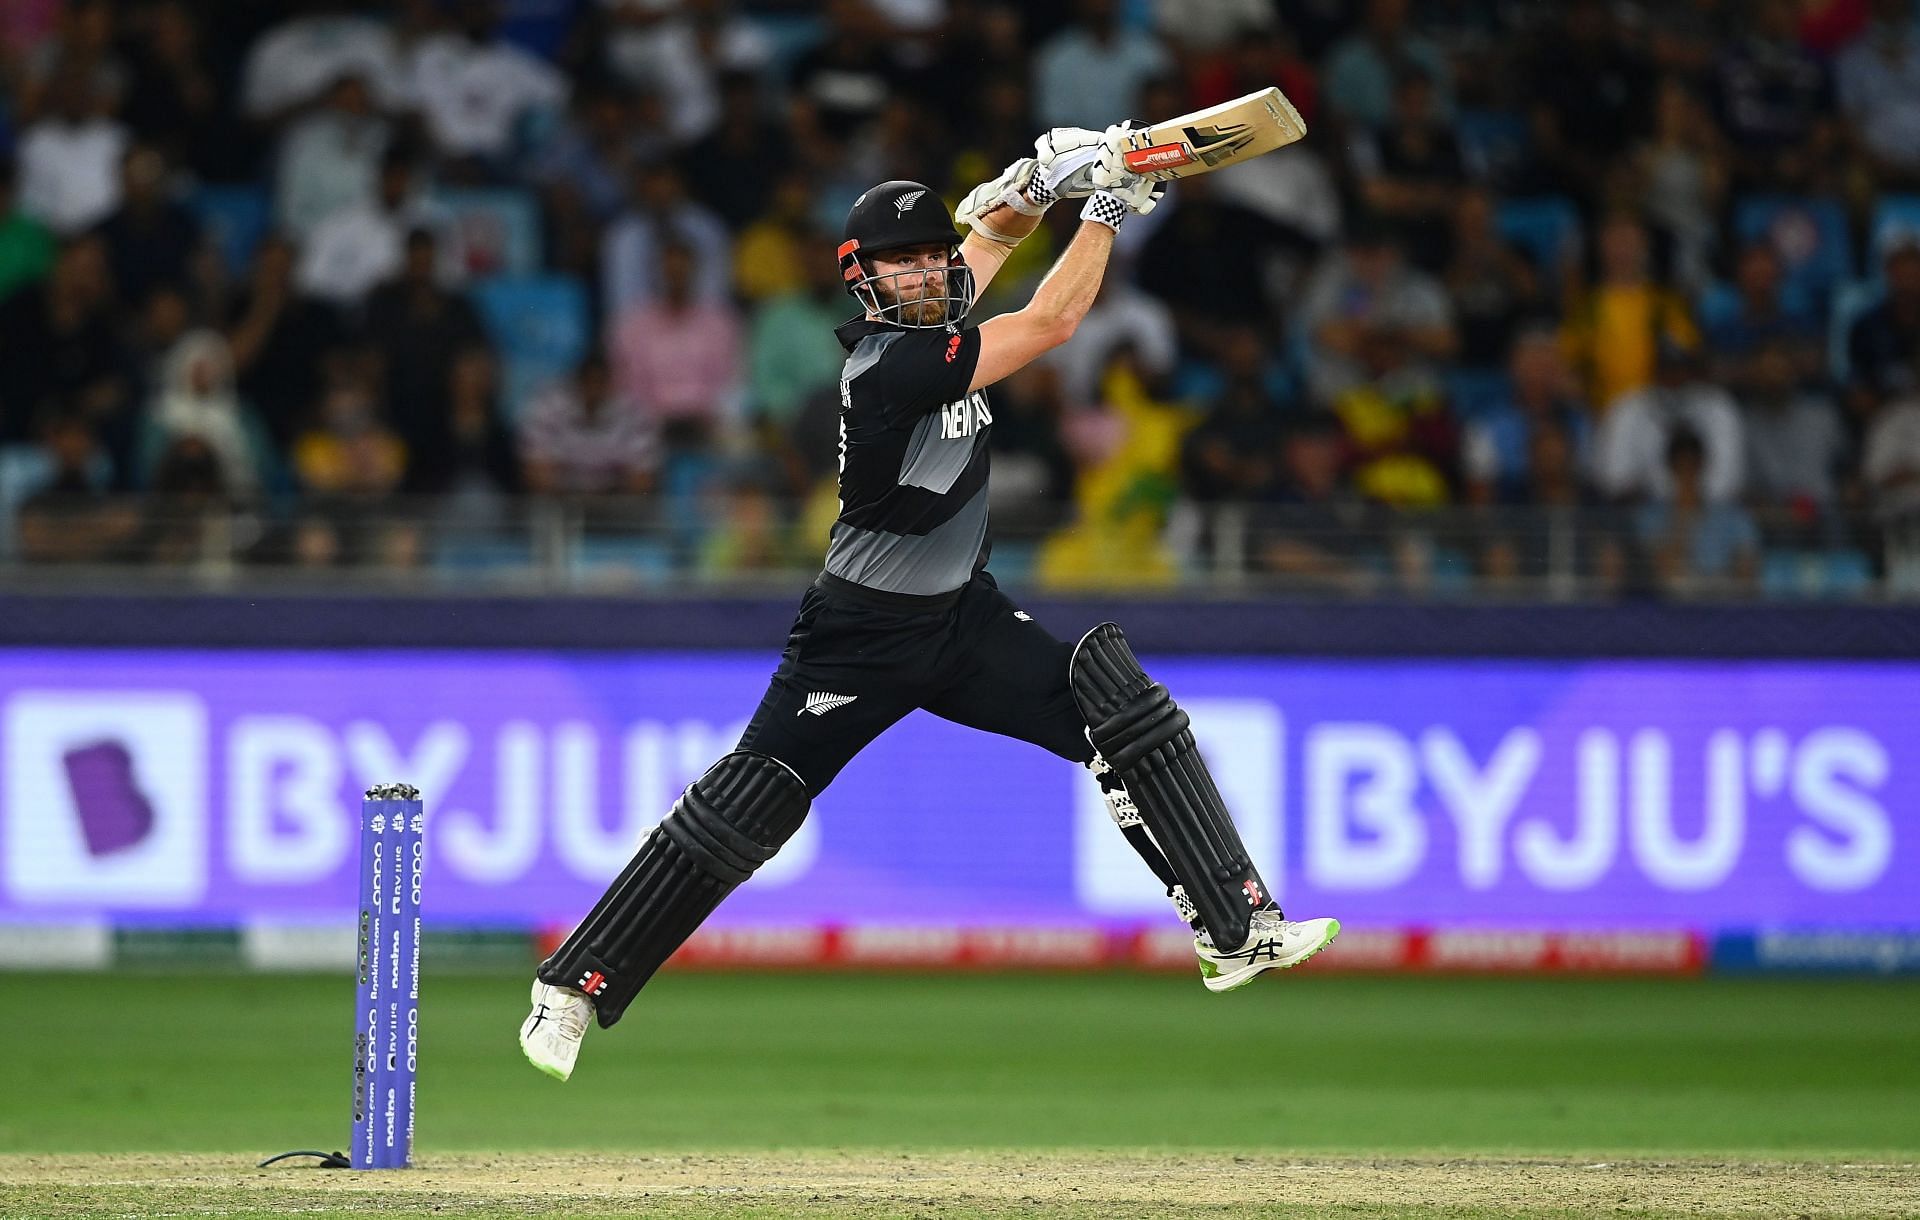 New Zealand&#039;s dependable captain, Kane Williamson stepped up in an all important final